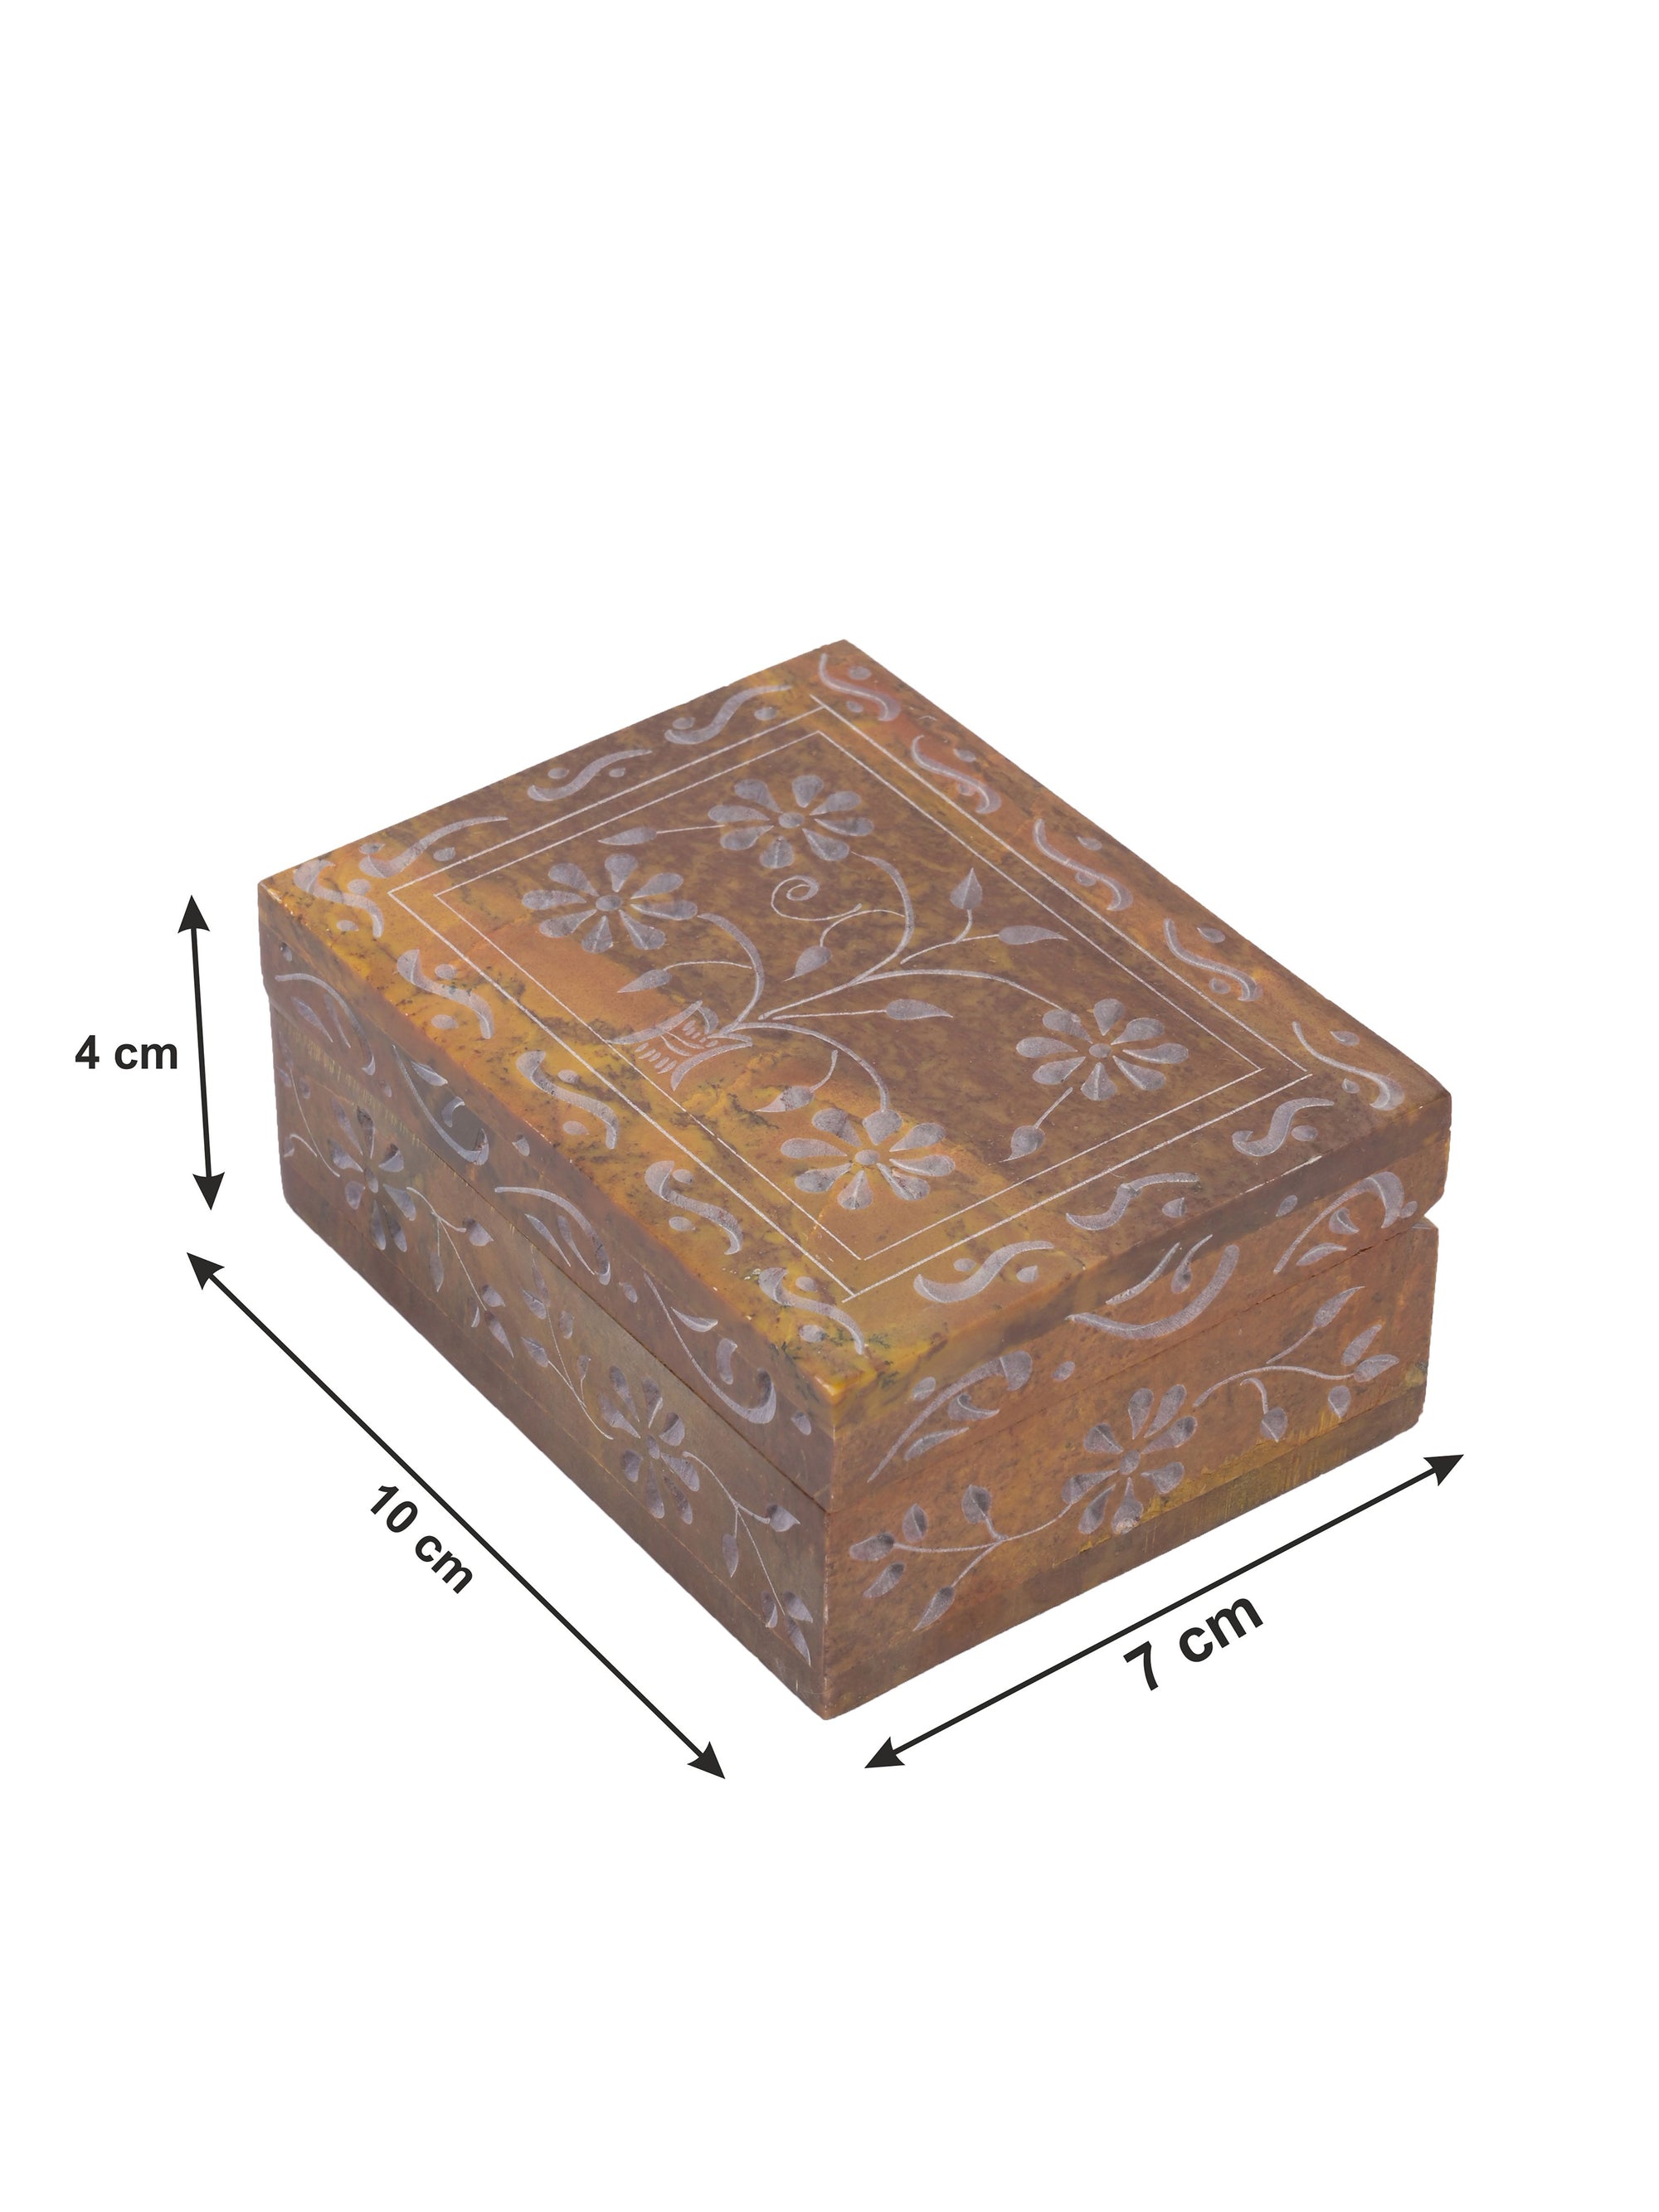 Soapstone crafted, small and stylish jewellery box - The Heritage Artifacts